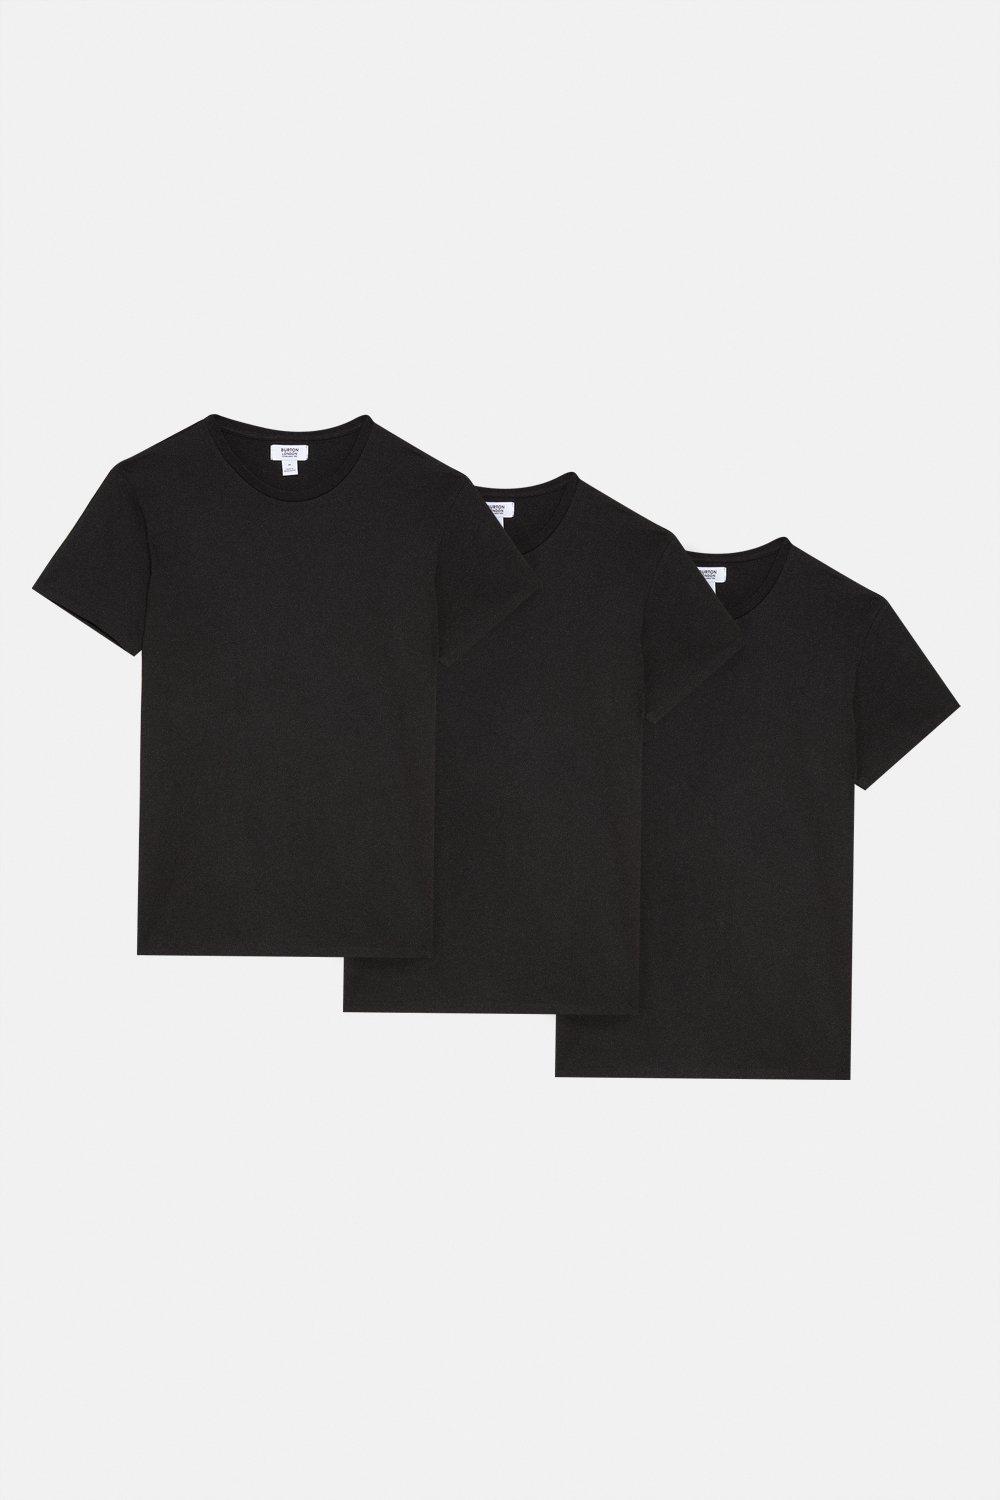 Mens Black 3 Pack Crew Neck T-shirts product